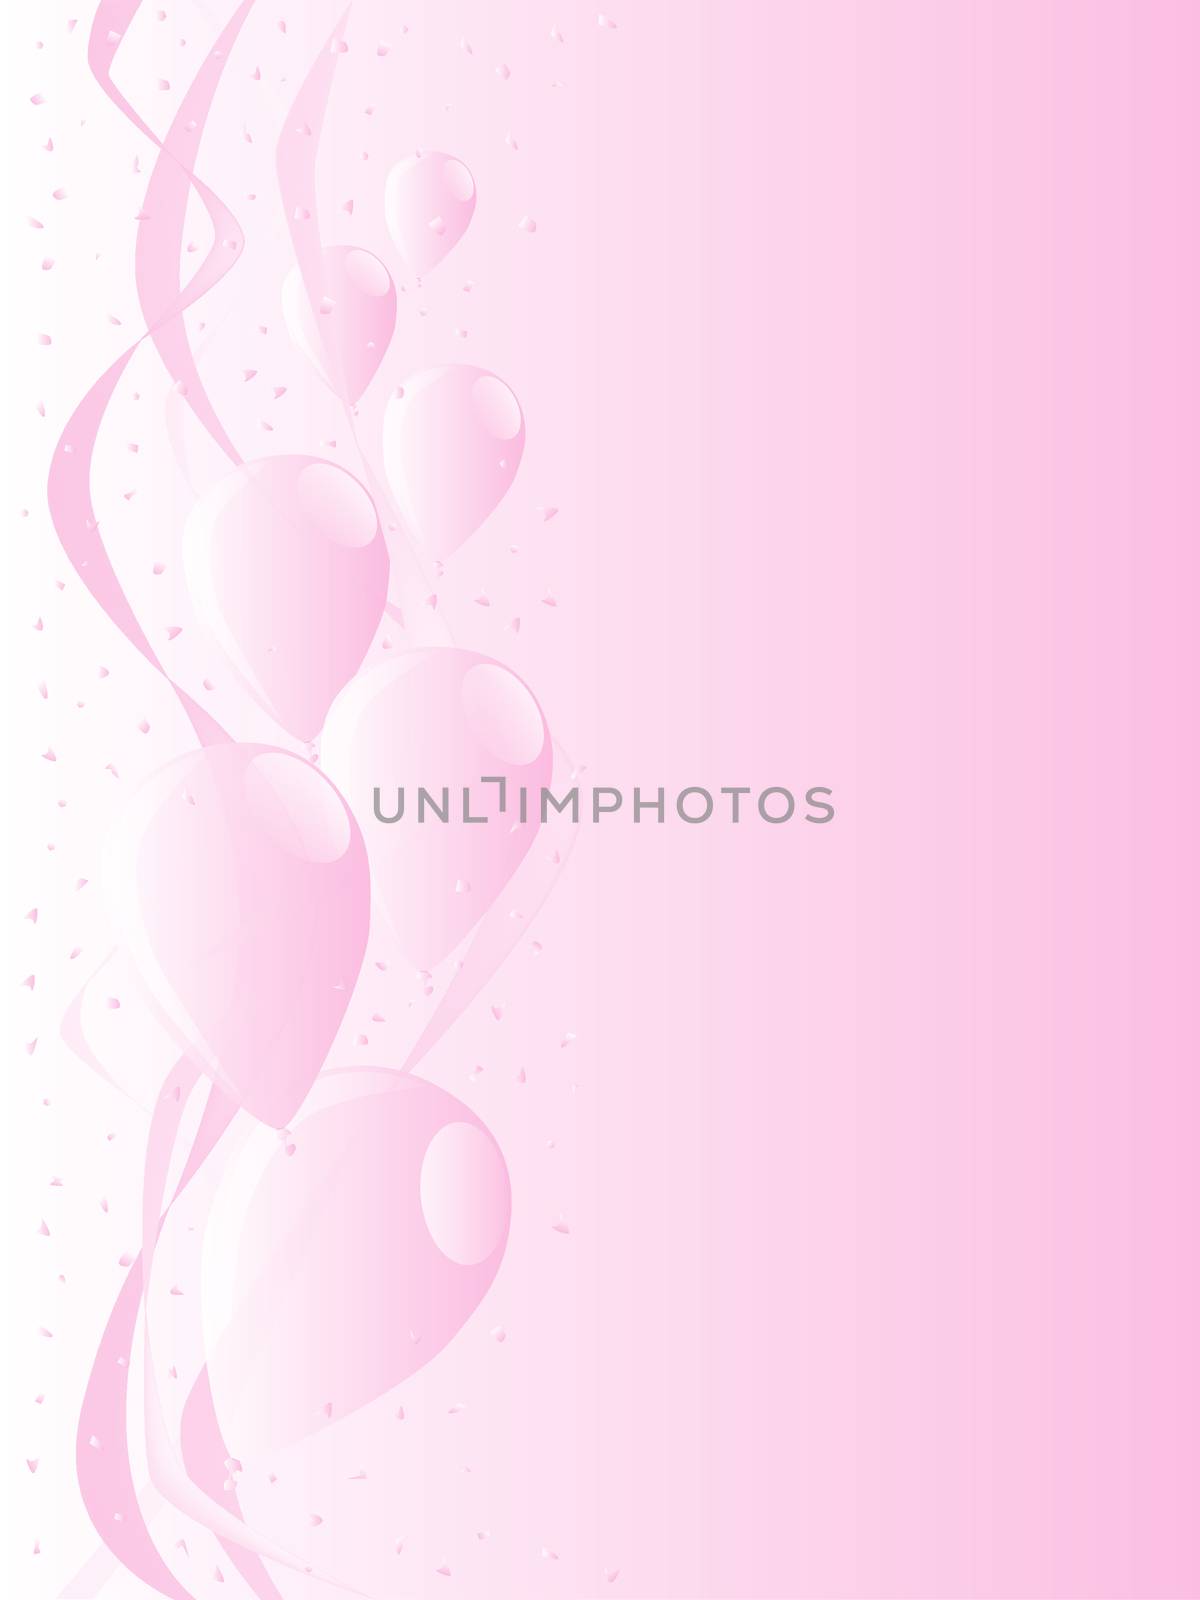 Pink balloons, confetti and streamers, a party image.